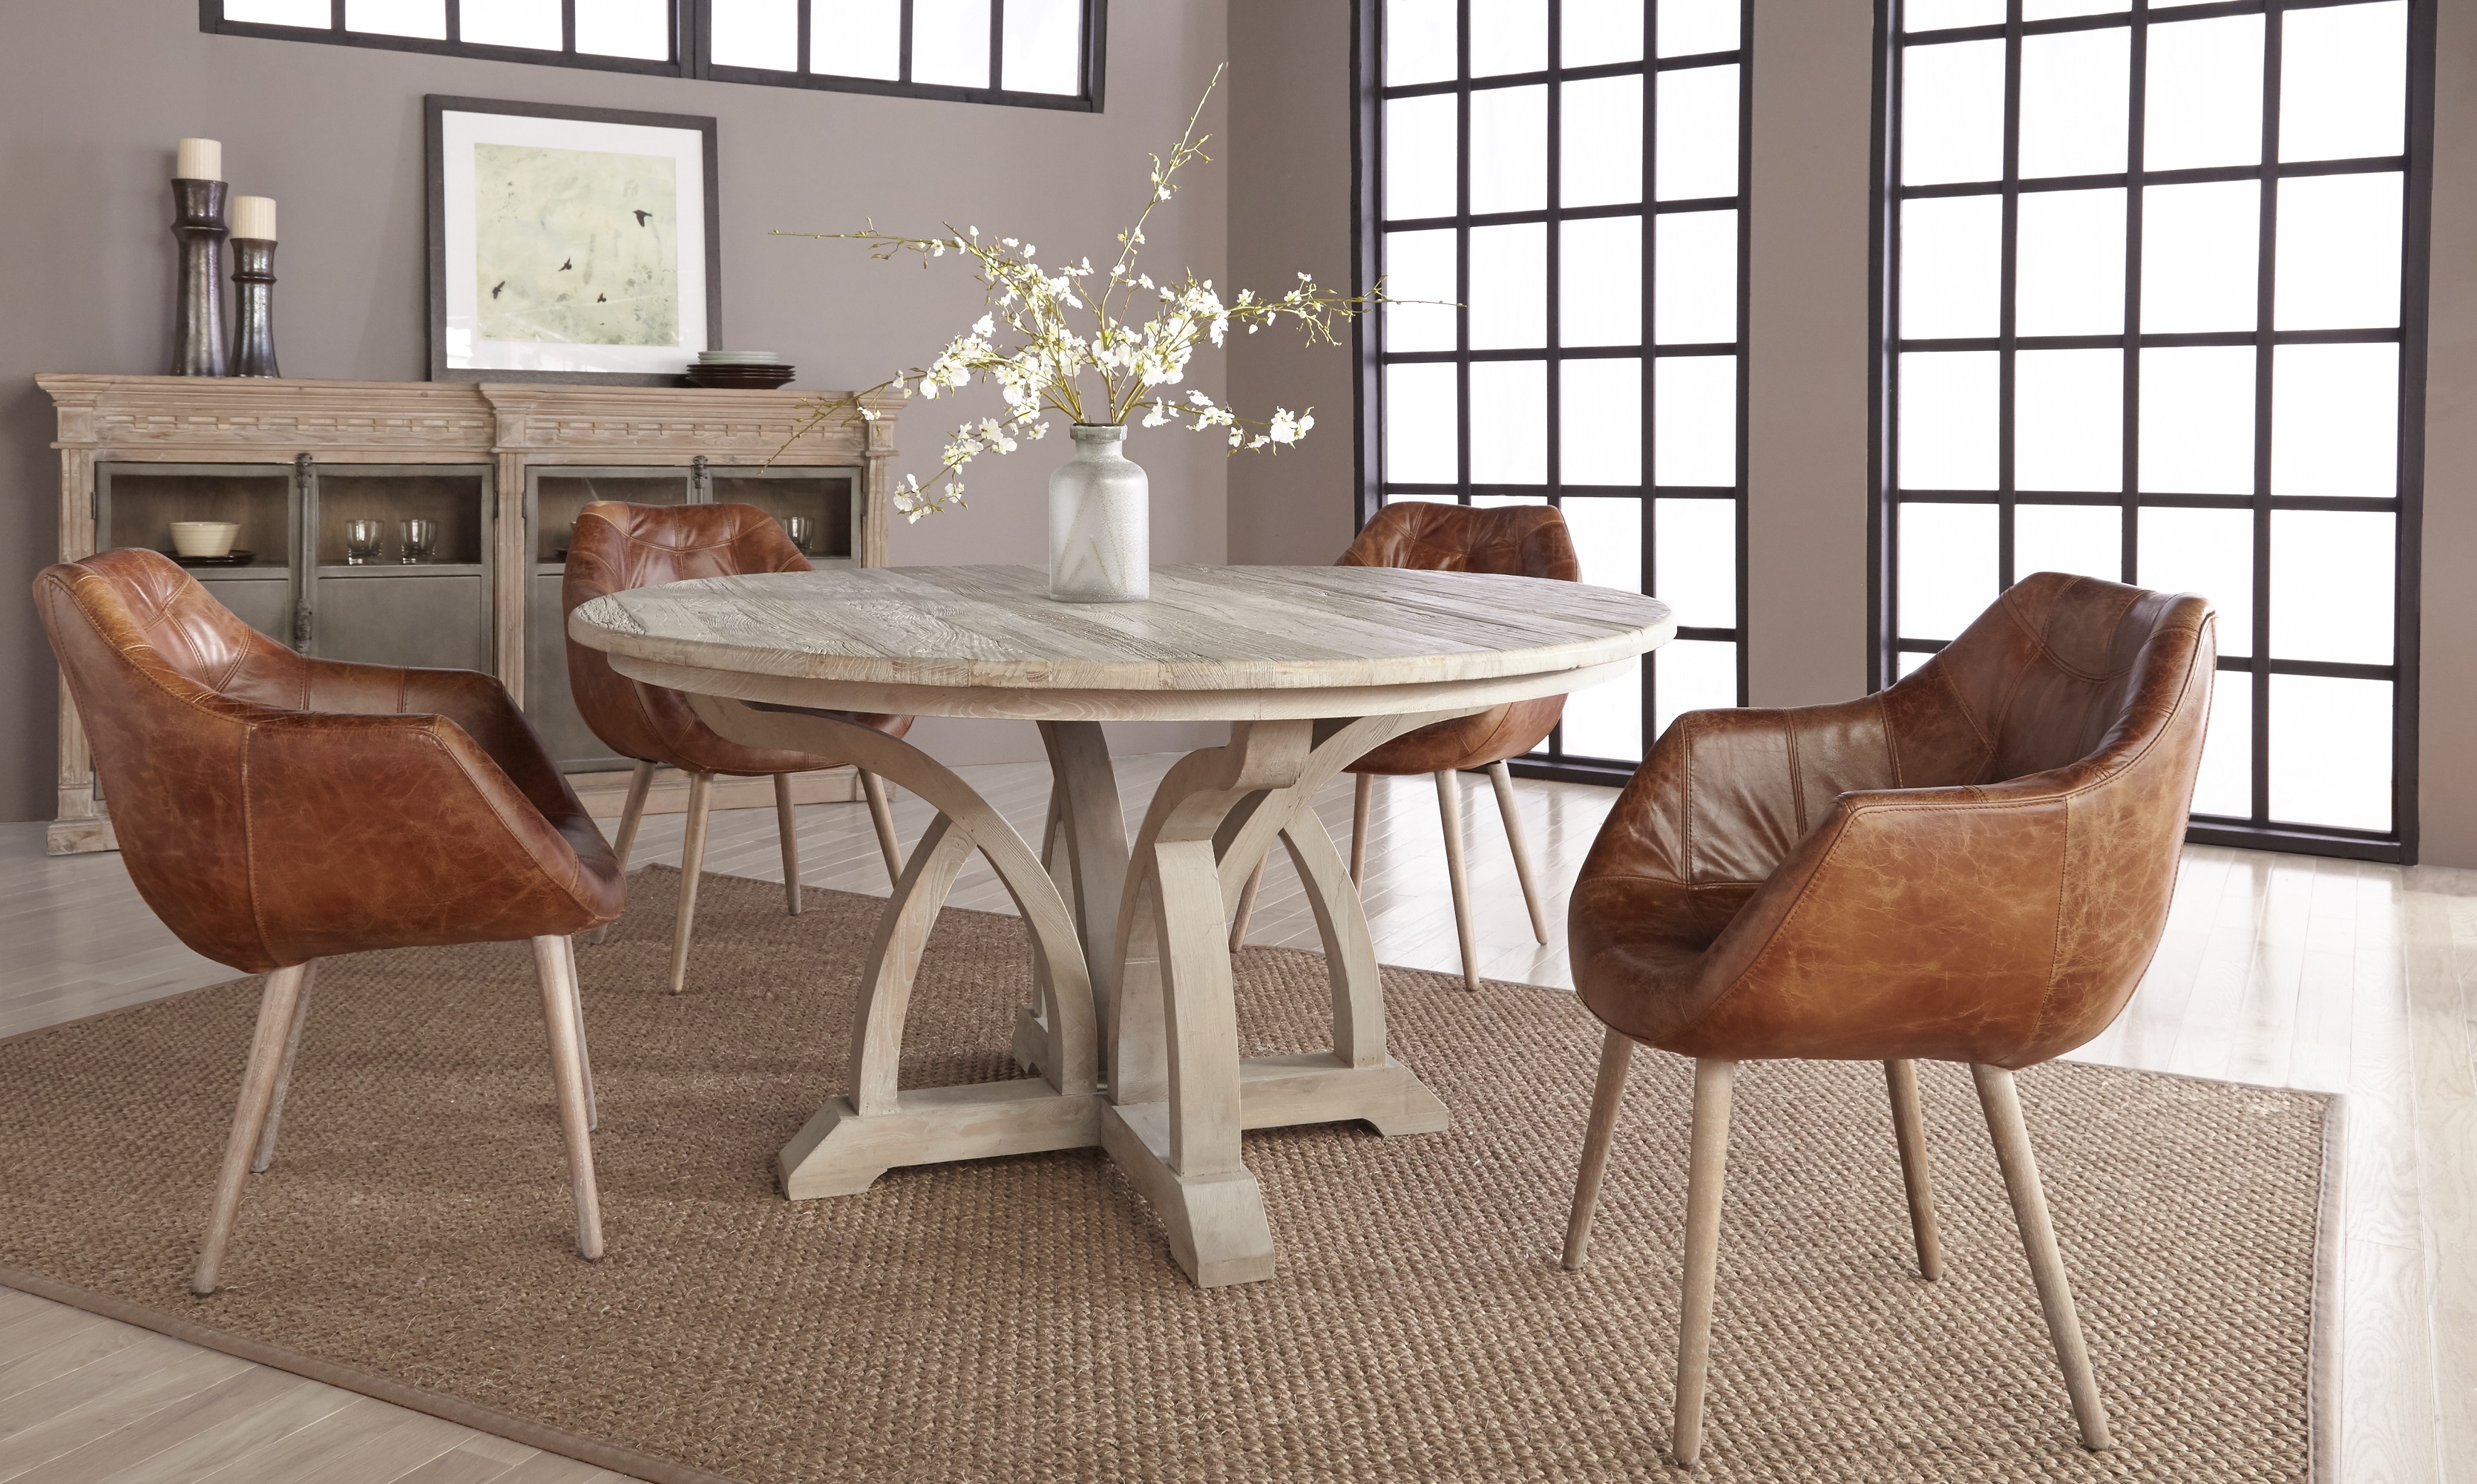 Marin Round Dining Table, 60", DISCONTINUED - Image 8